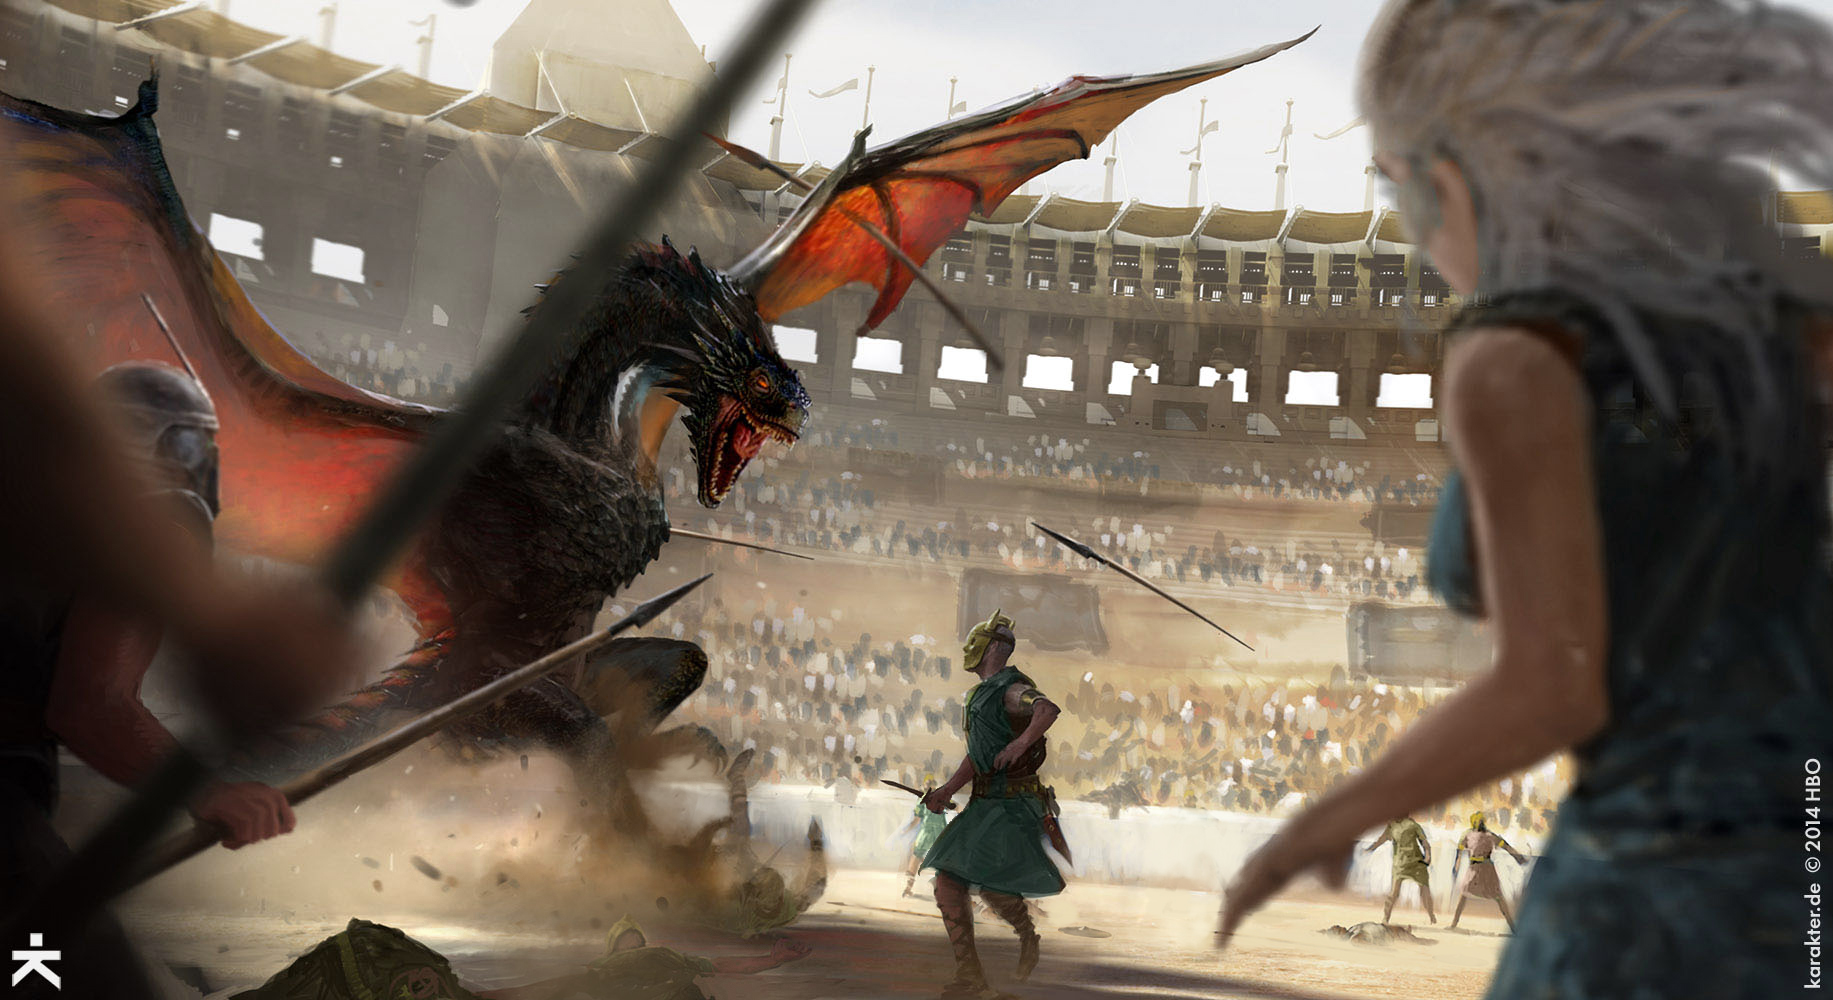 Game of Thrones: Revisit Some Iconic Season 5 Moments with These Concept Art Pieces